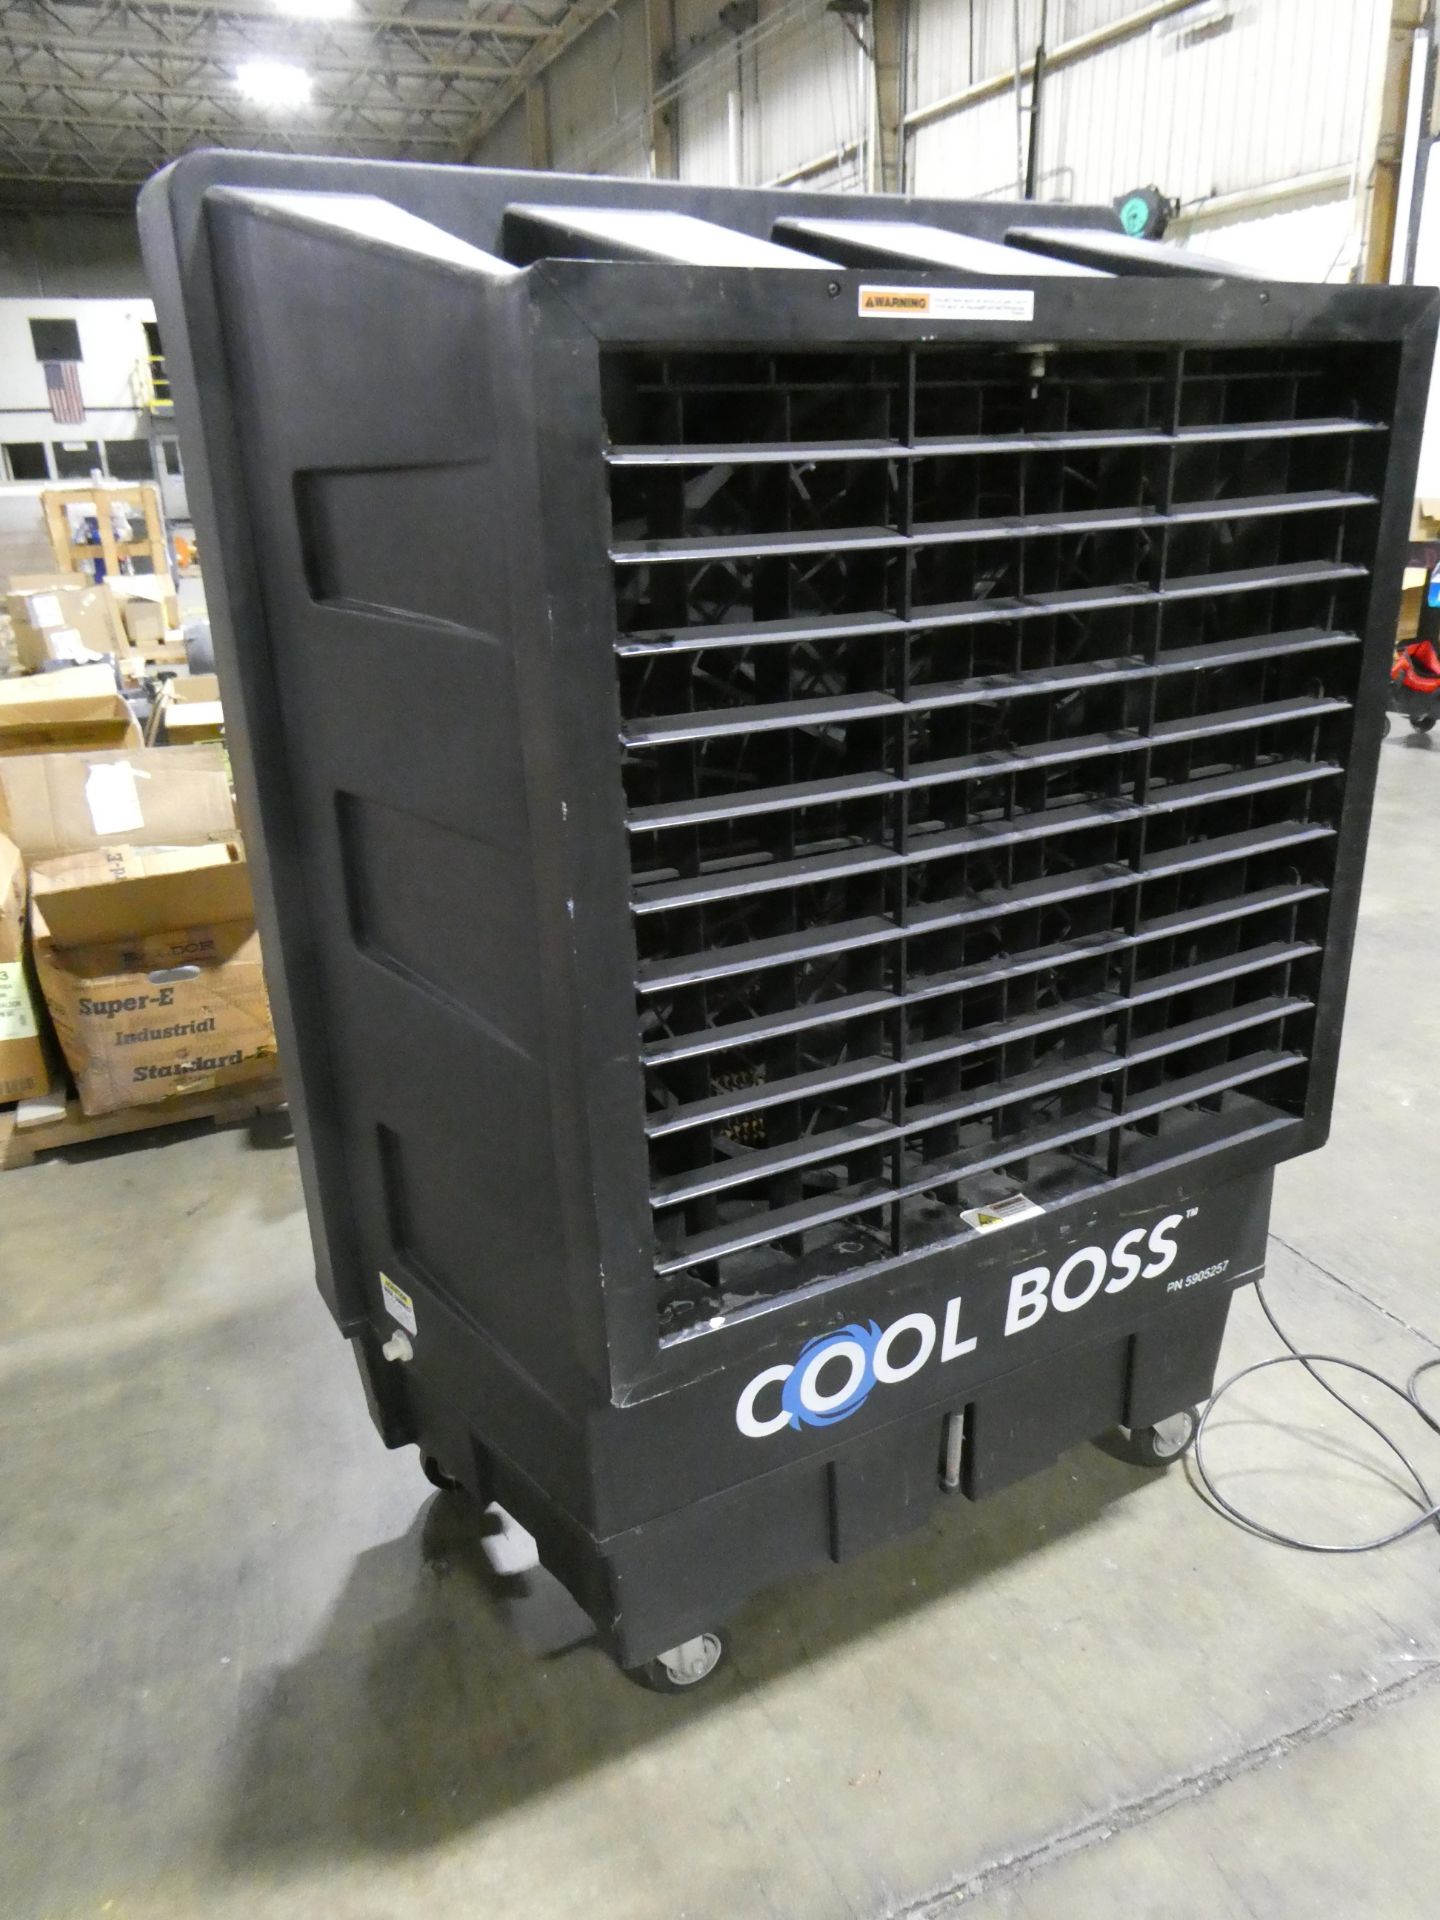 Cool Boss Evaporative Air Cooler - Image 2 of 3